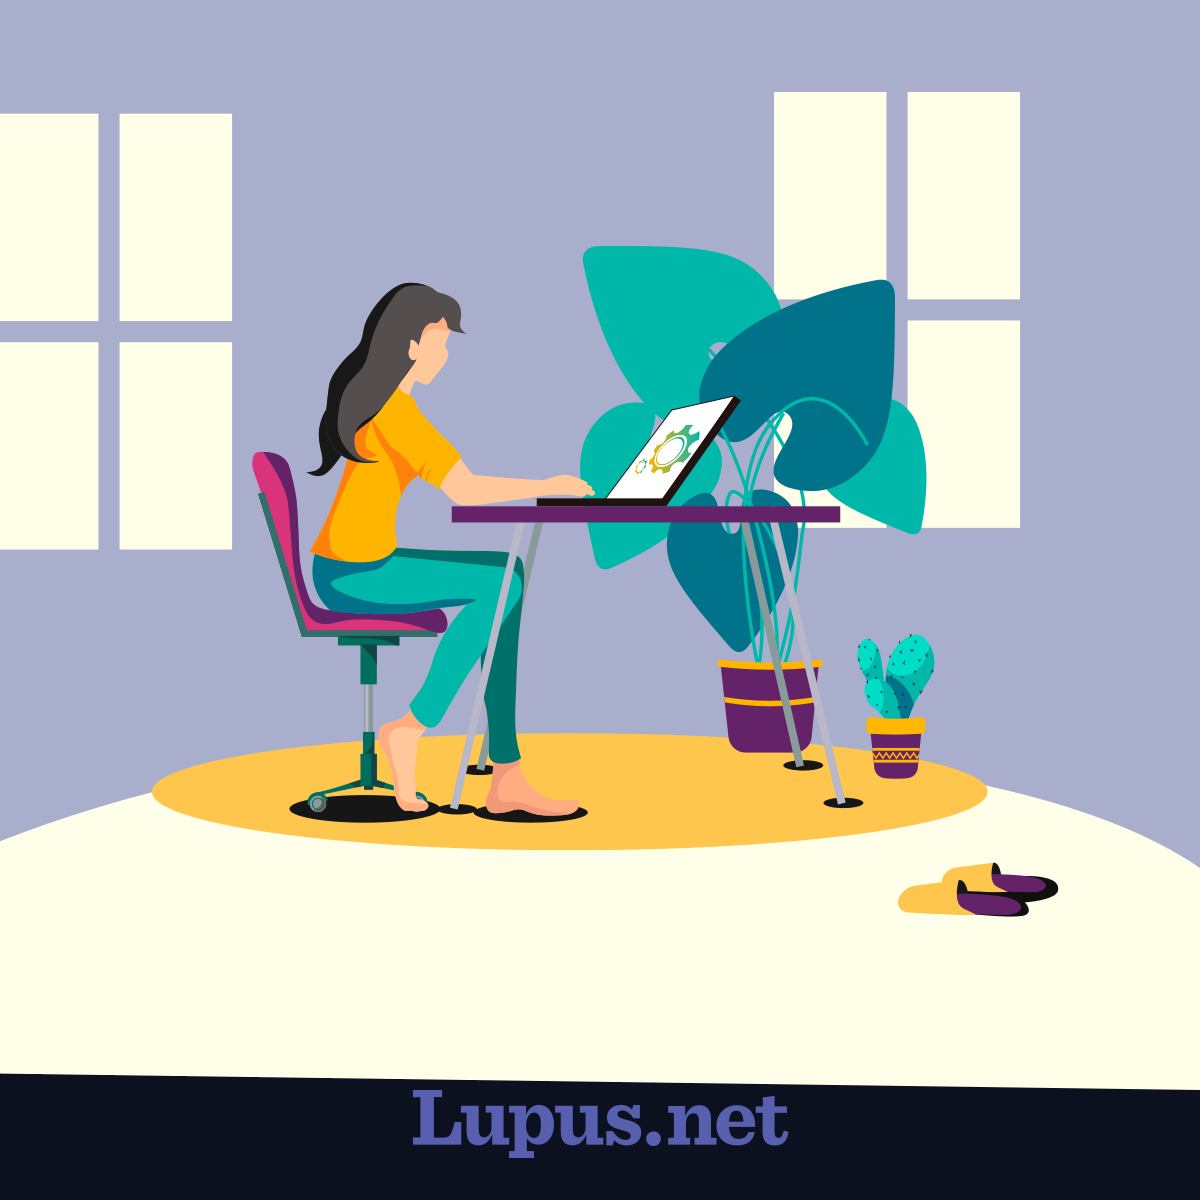 A young woman with lupus sits at a desk in her home, working on her laptop, with slippers nearby.